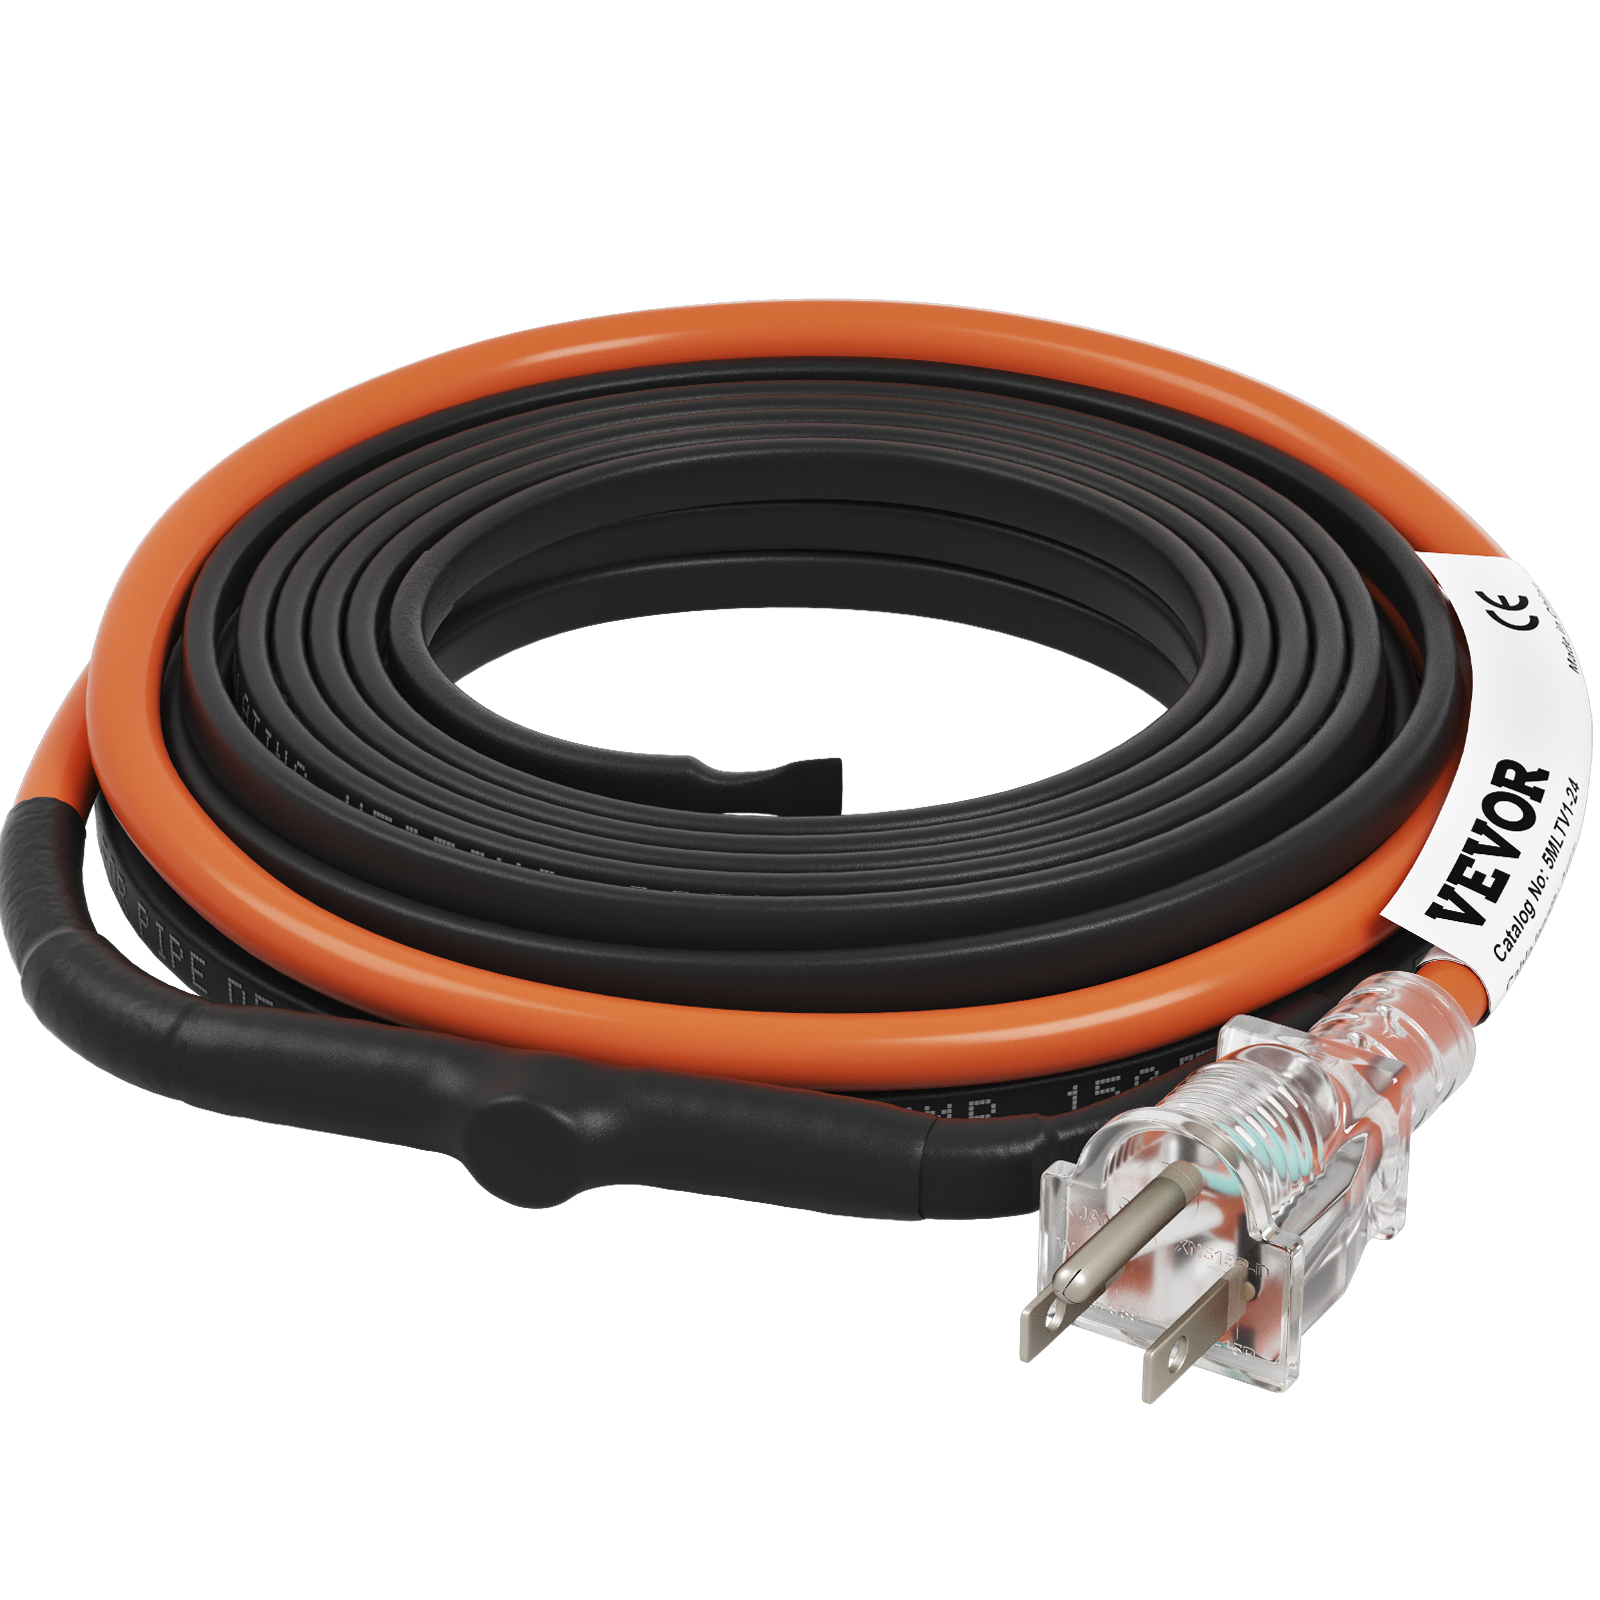 VEVOR Self-Regulating Pipe Heating Cable, 60-feet 5W/ft Heat Tape for Pipes  Freeze Protection, Protects PVC Hose, Metal and Plastic Pipe from Freezing,  120V